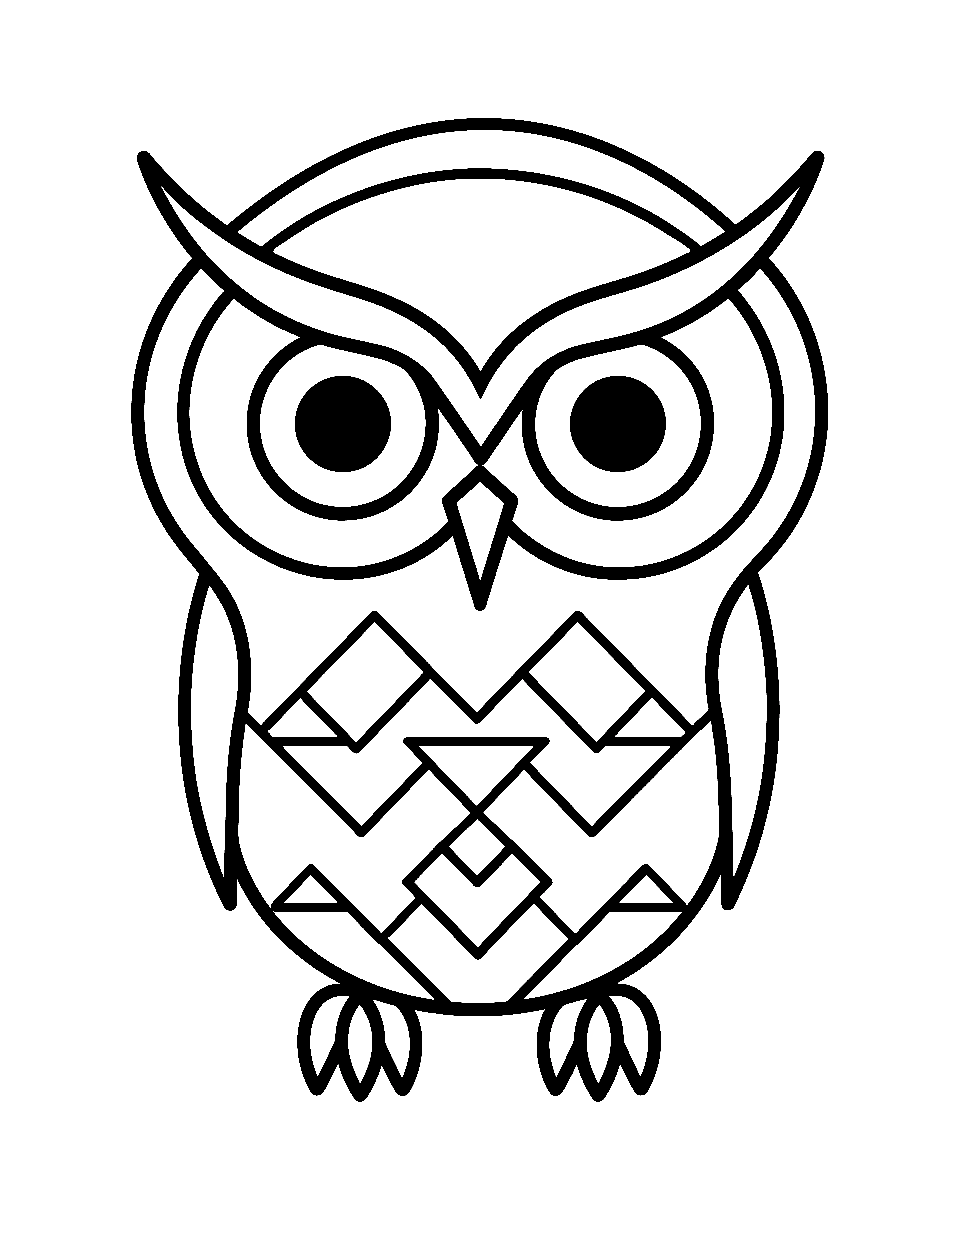 Preschool Owl with Shapes Coloring Page - An owl composed of basic shapes like circles and triangles.